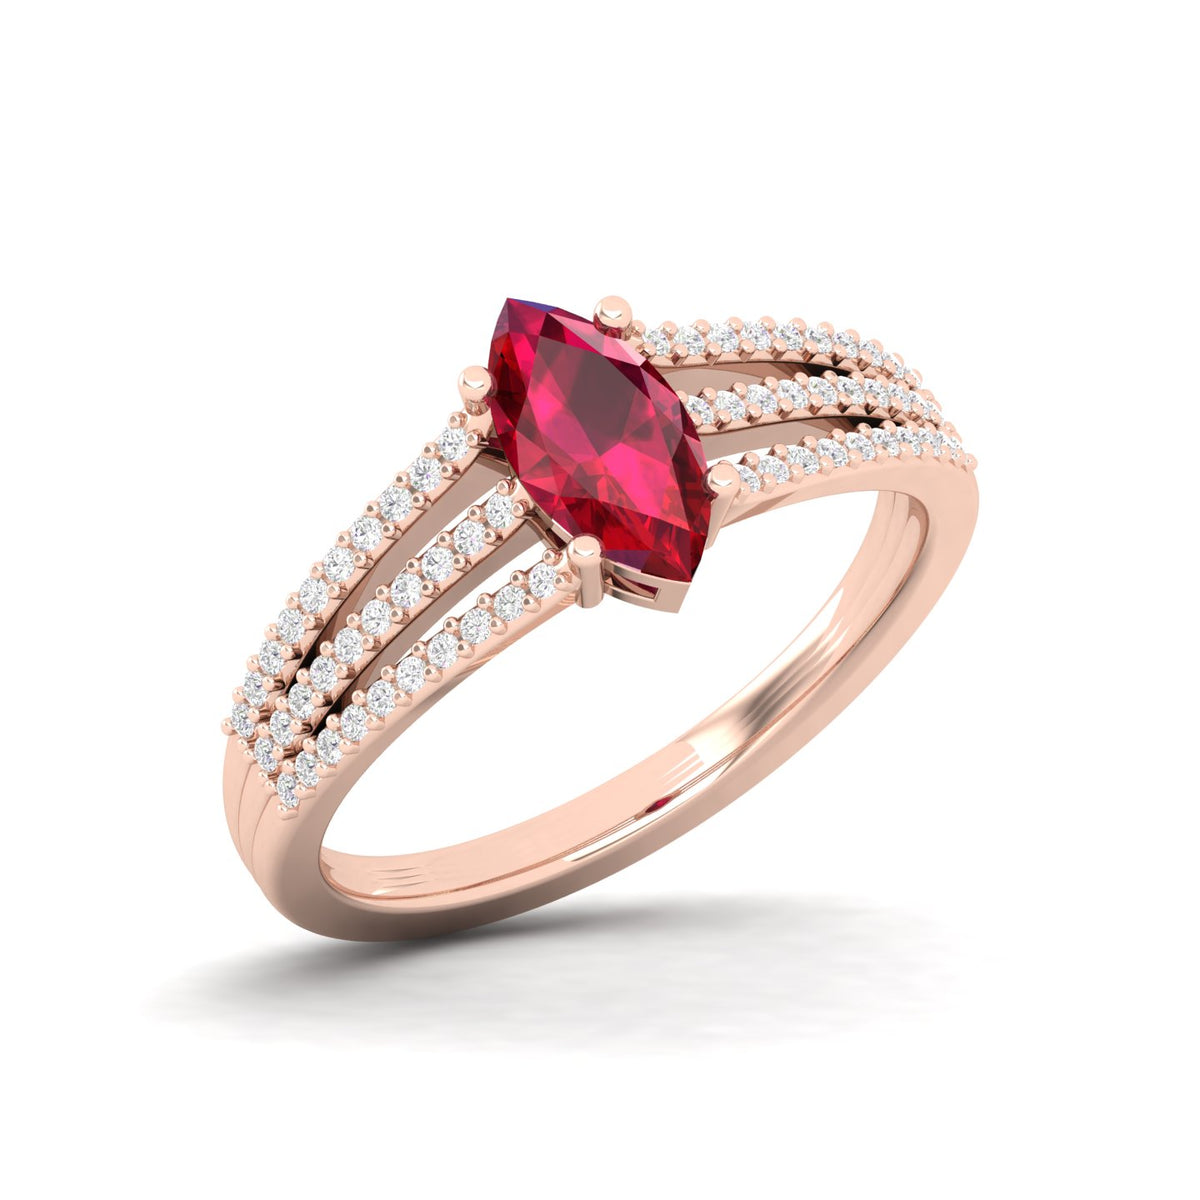 Maurya Third Eye Solitaire Ruby Split Shank Engagement Ring with Accent Diamonds